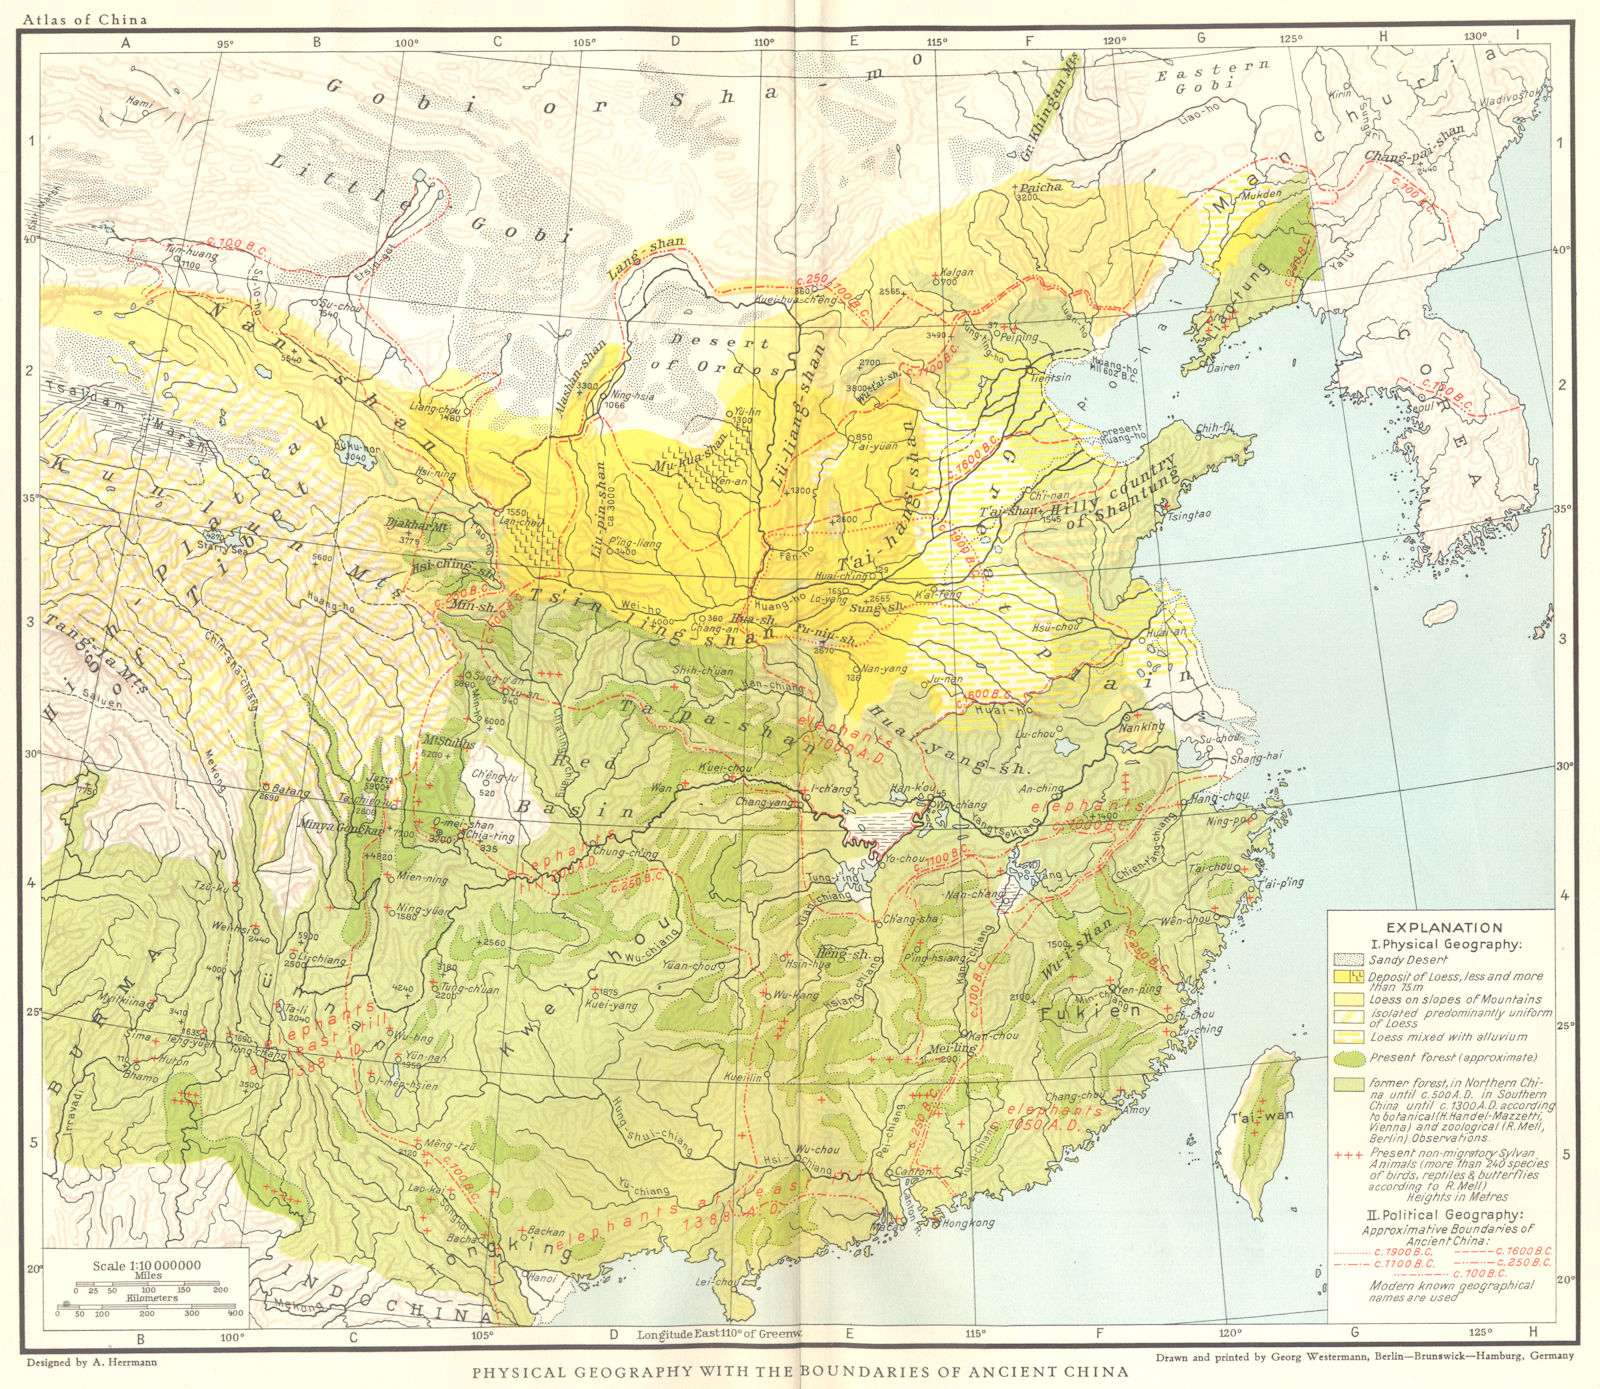 Physical Geography & boundaries of Ancient China. Range of Elephants 1935 map